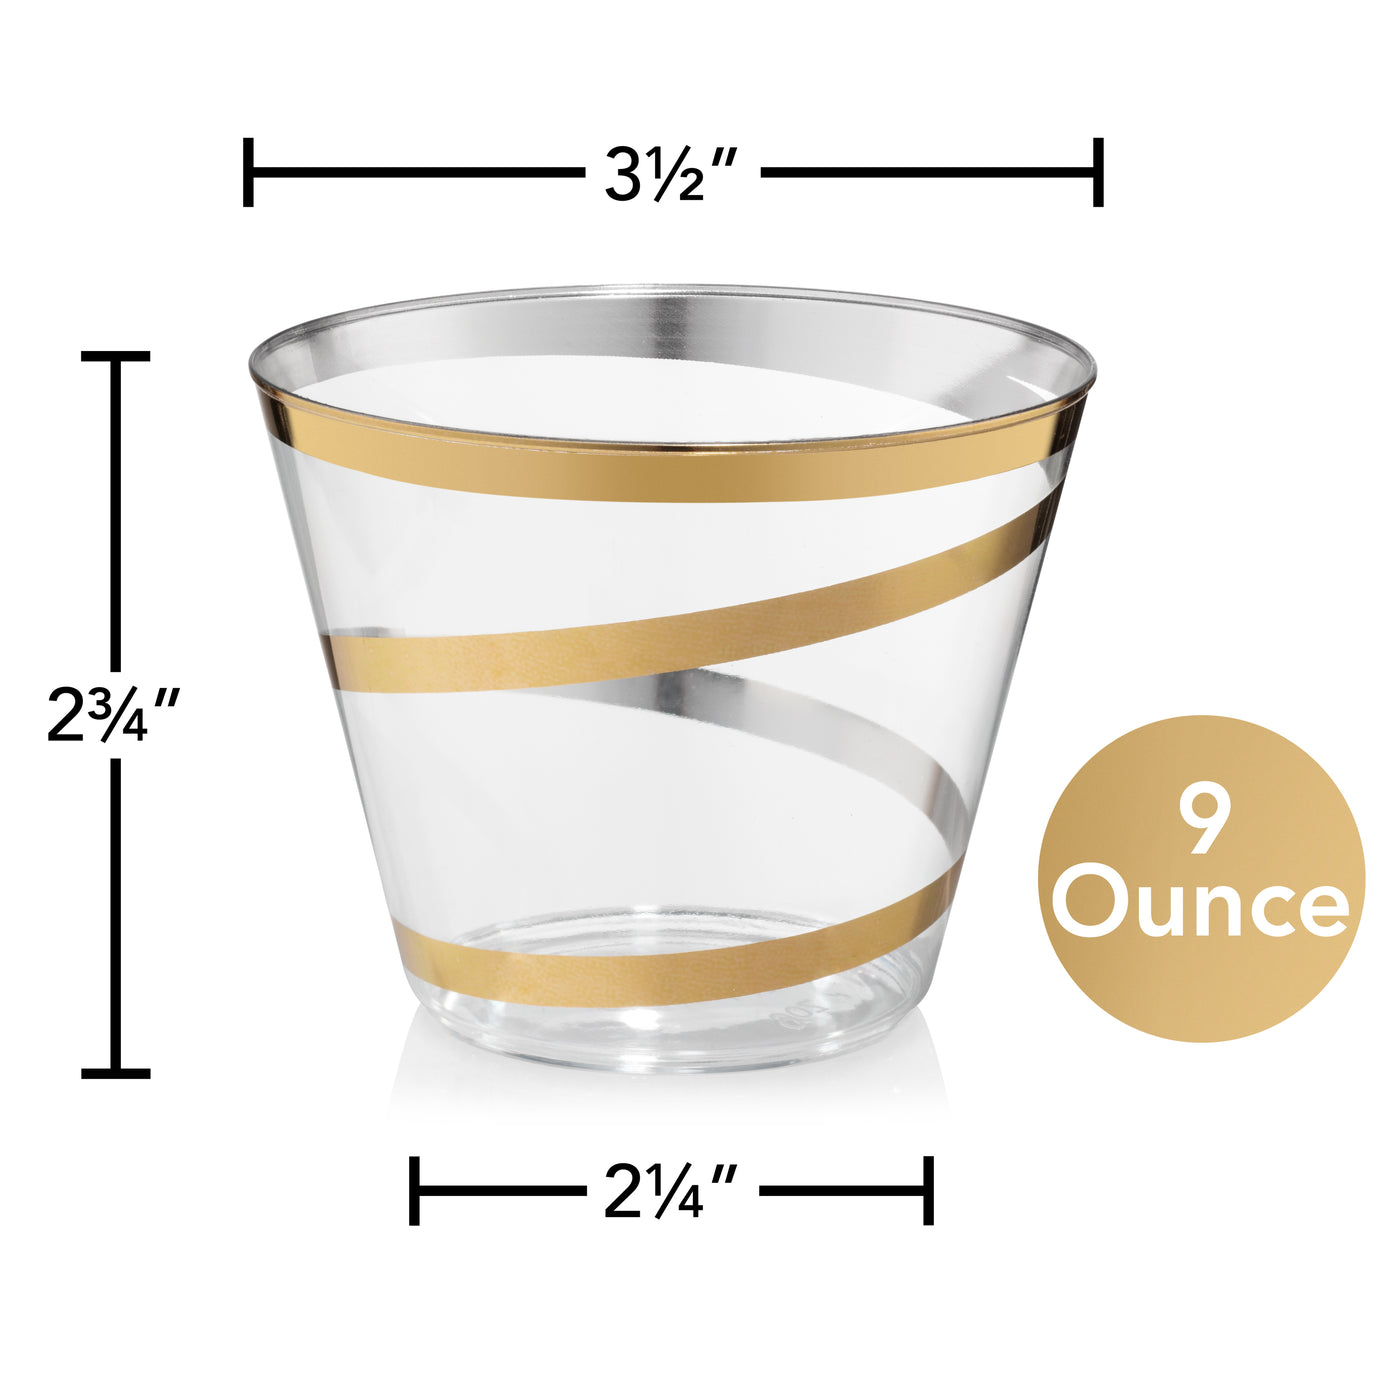 Perfect Settings 110 Gold Rimmed Clear Plastic Disposable Party Cups 9 Ounce - Gold Swirl - Name Brand Corner